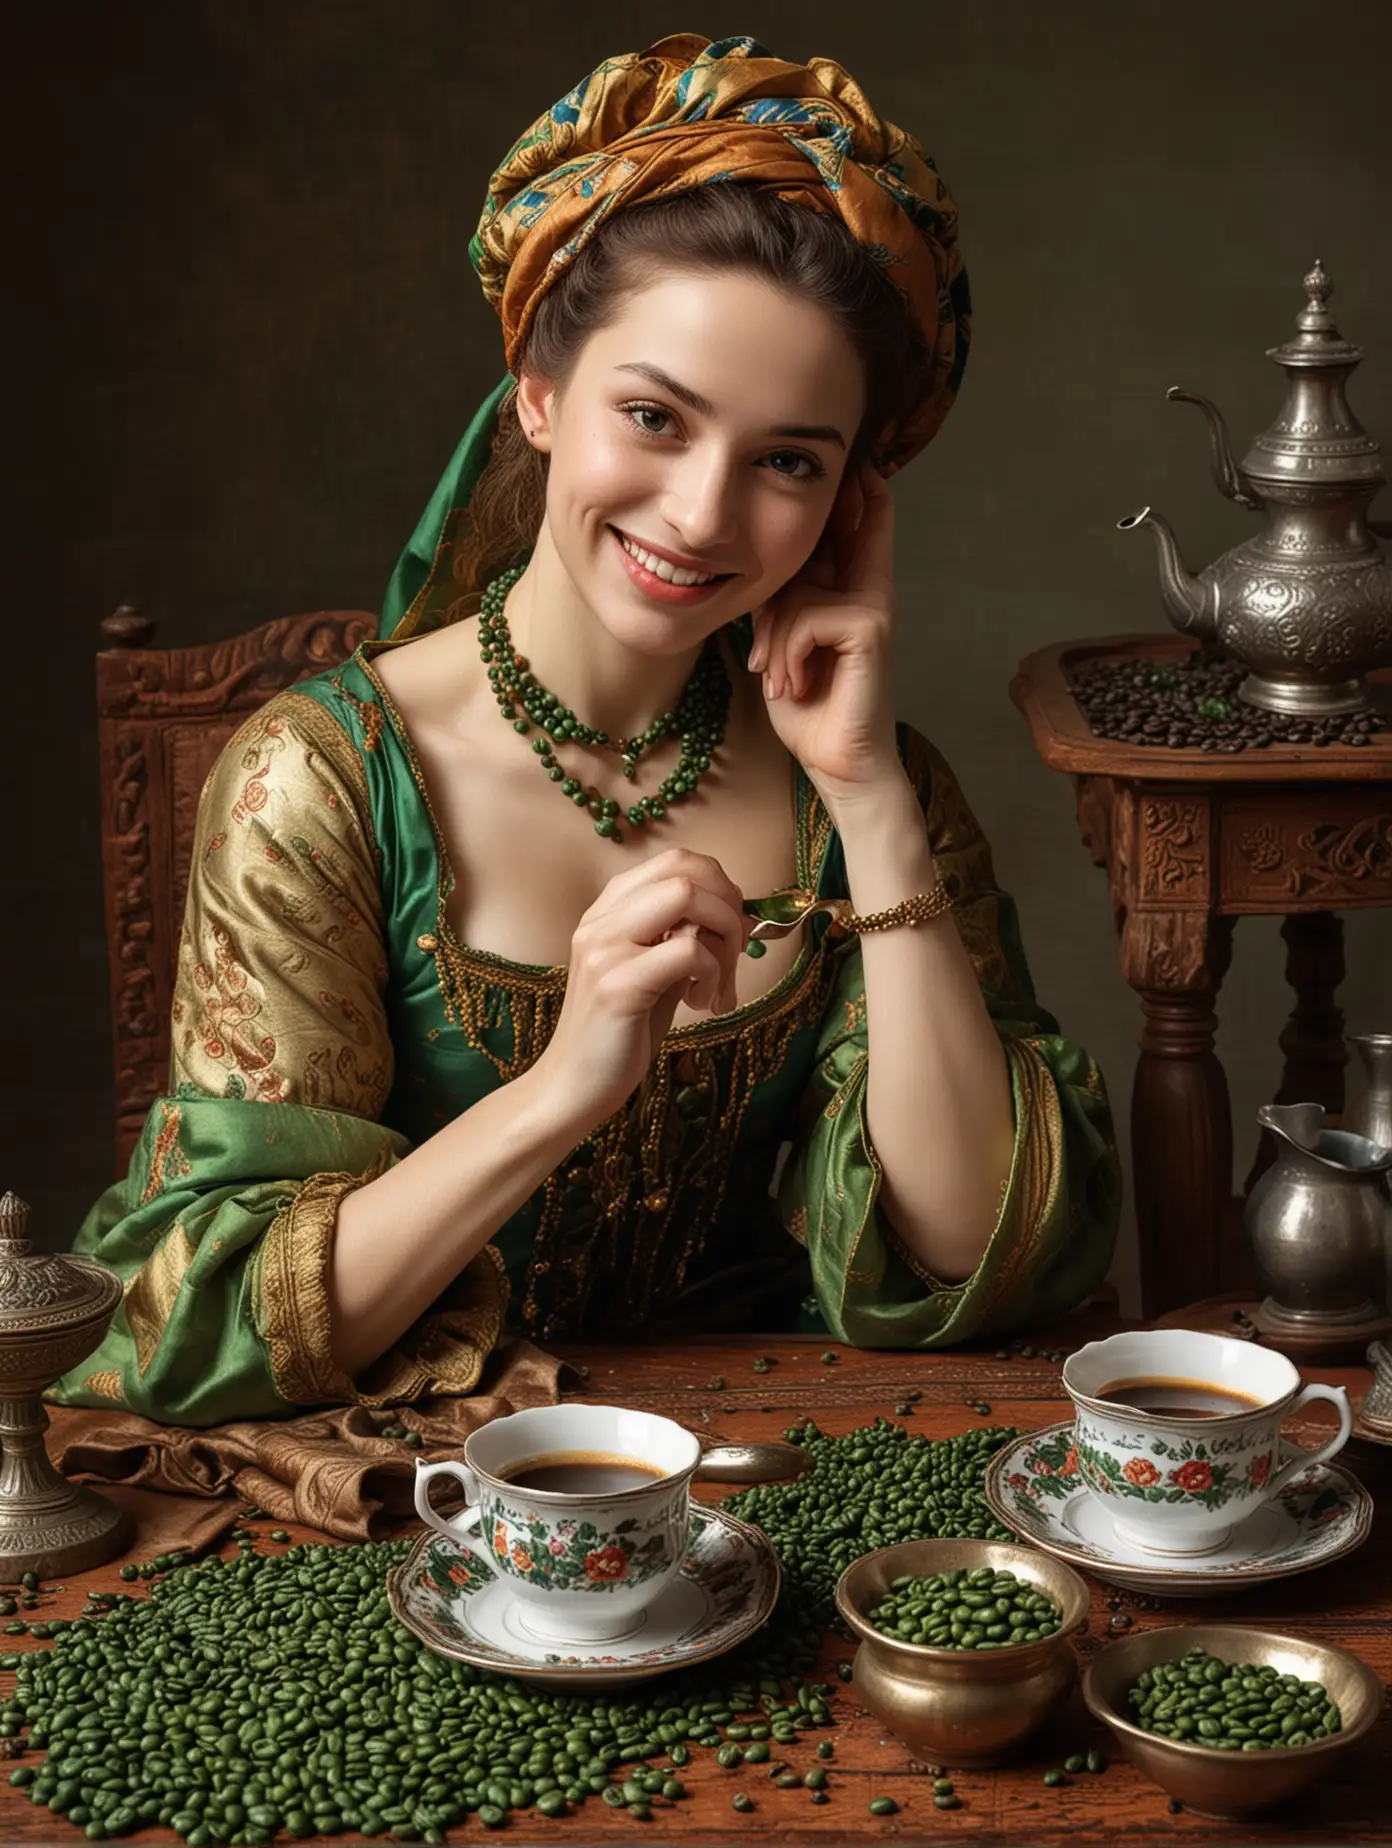 Make exactly like the image A gorgeous beautiful 17th century odalisque slightly smiling, drinking coffee and green coffee beans are split on the table with coffee cups and dishes like the image 